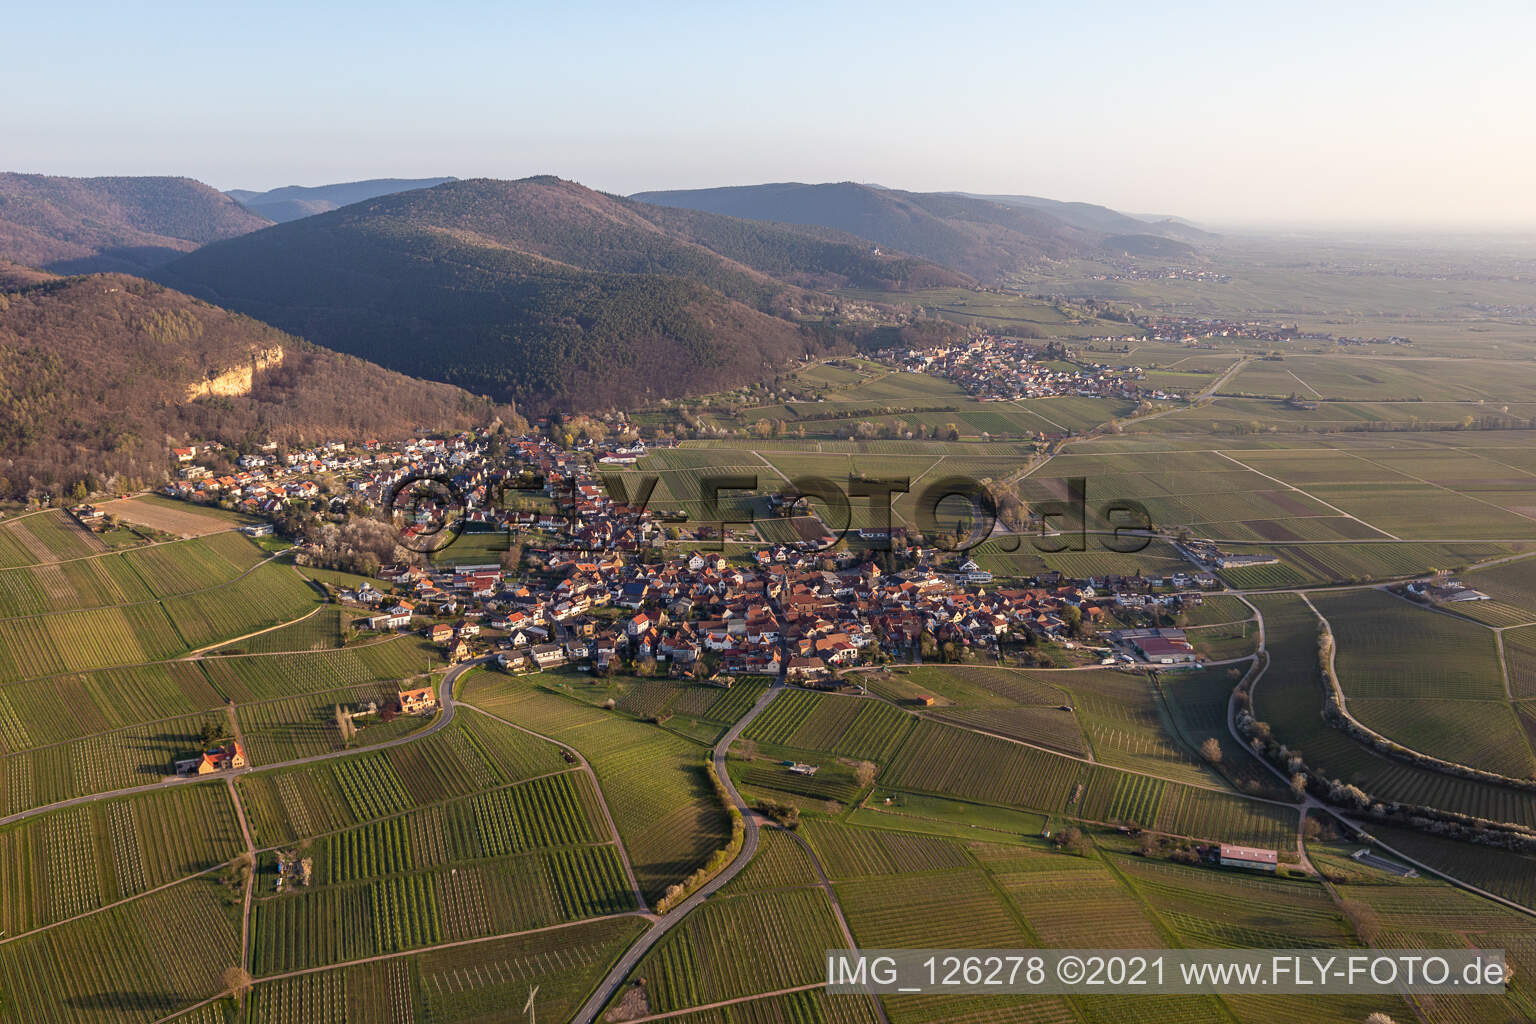 Frankweiler in the state Rhineland-Palatinate, Germany from the drone perspective